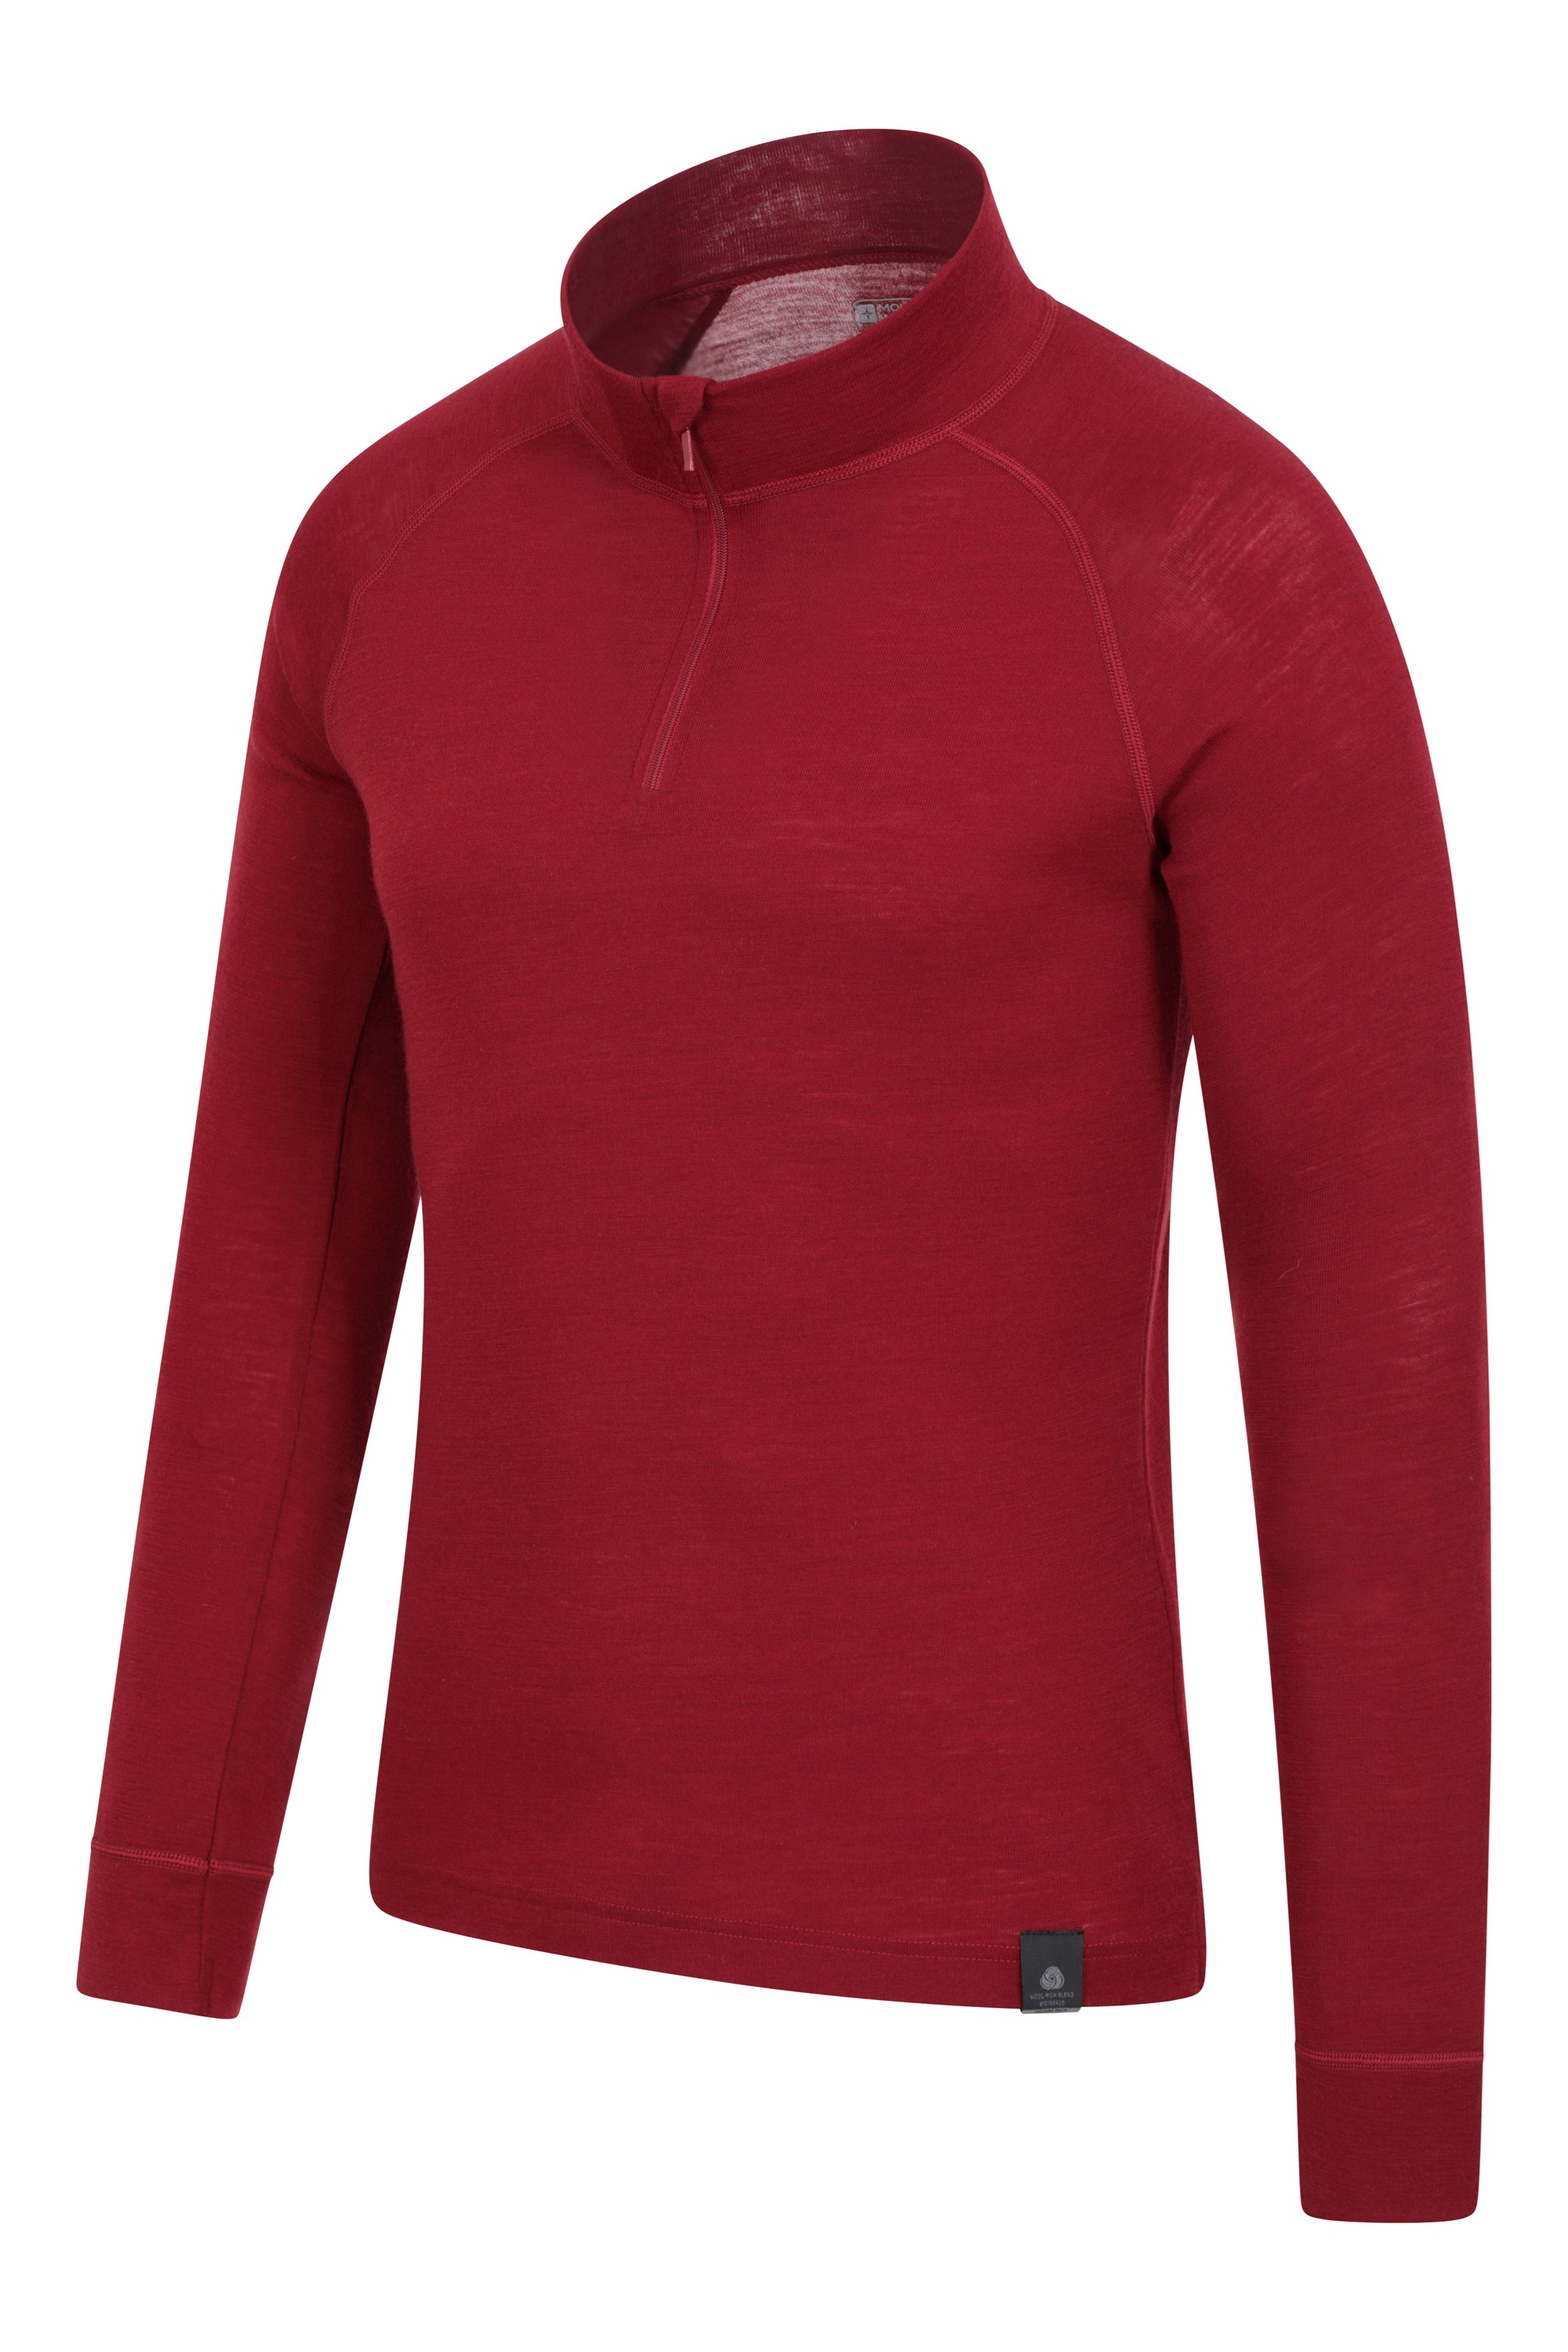 Mountain Warehouse Merino Mens Long Sleeved Top with Round Neck Easy Care